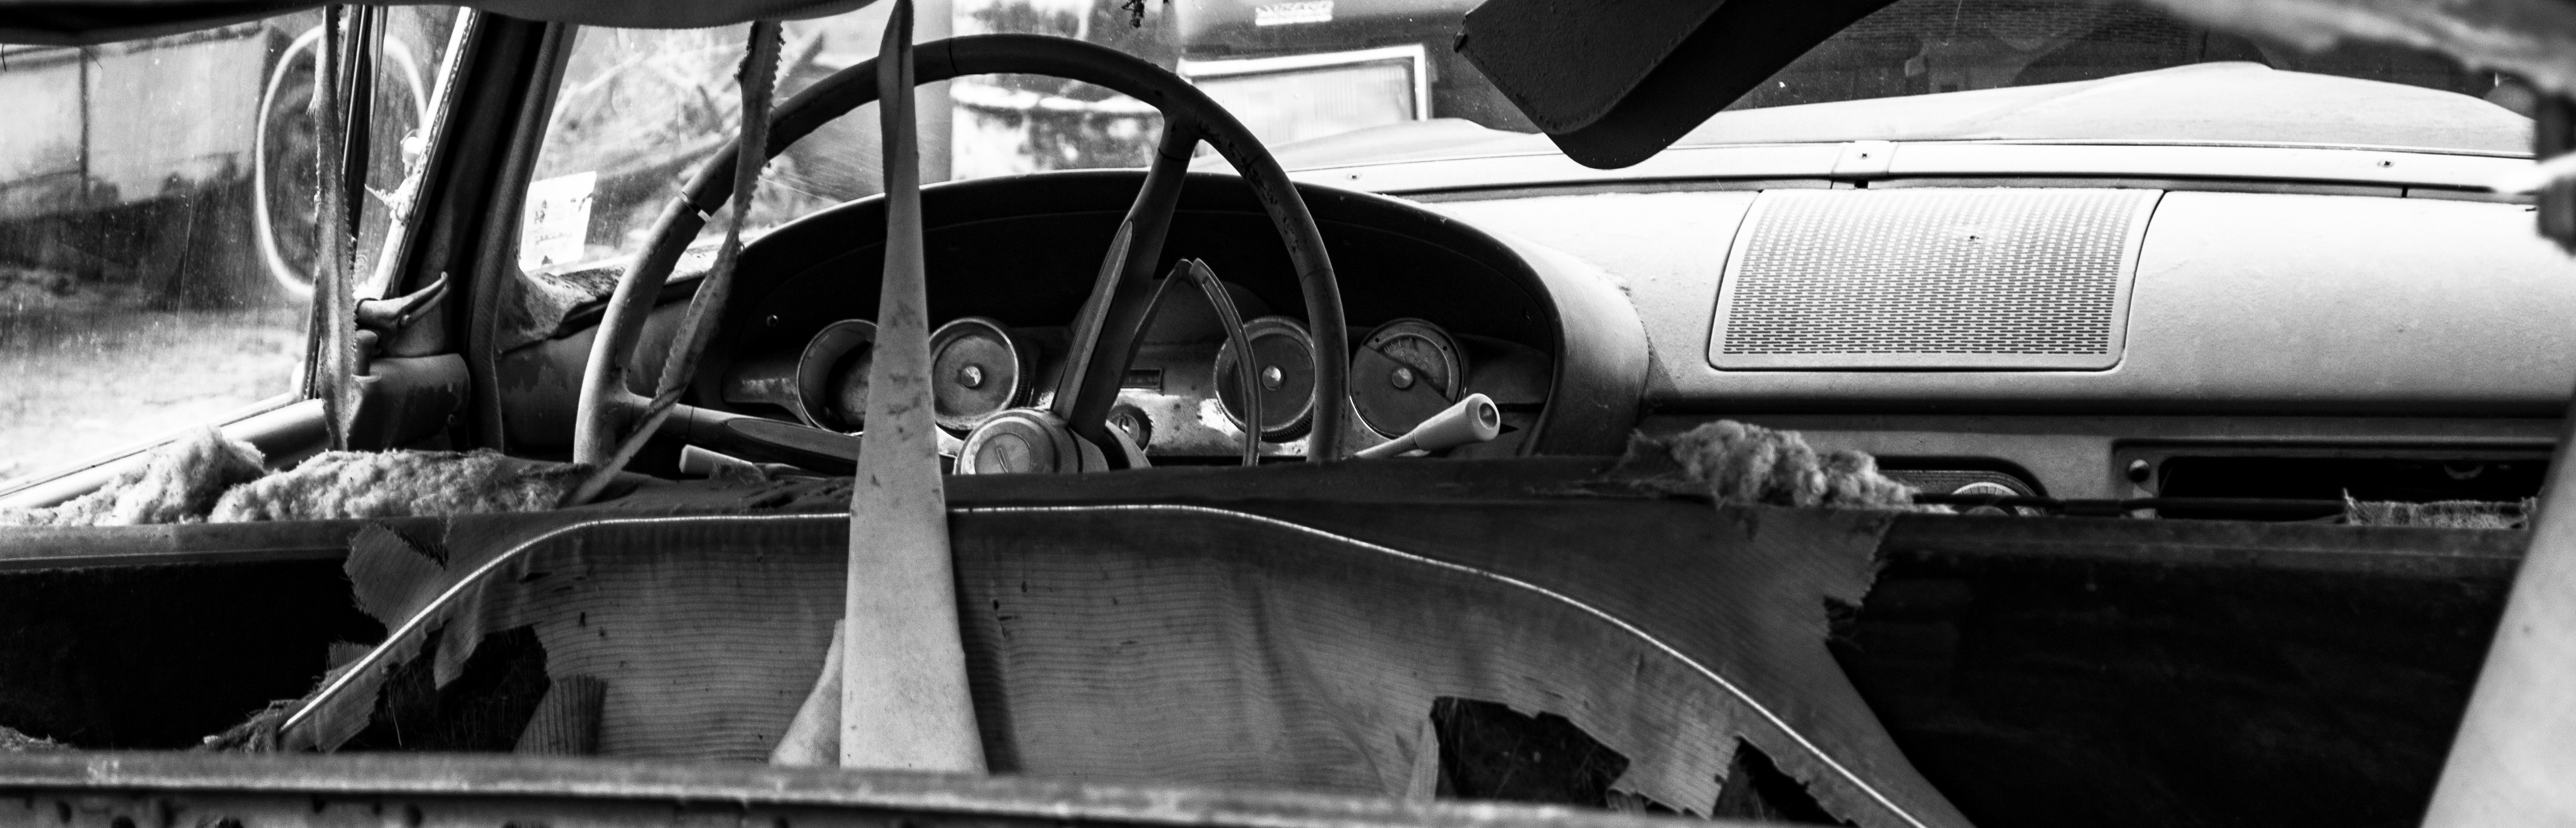 Black and white photo of an abandoned car dashboard